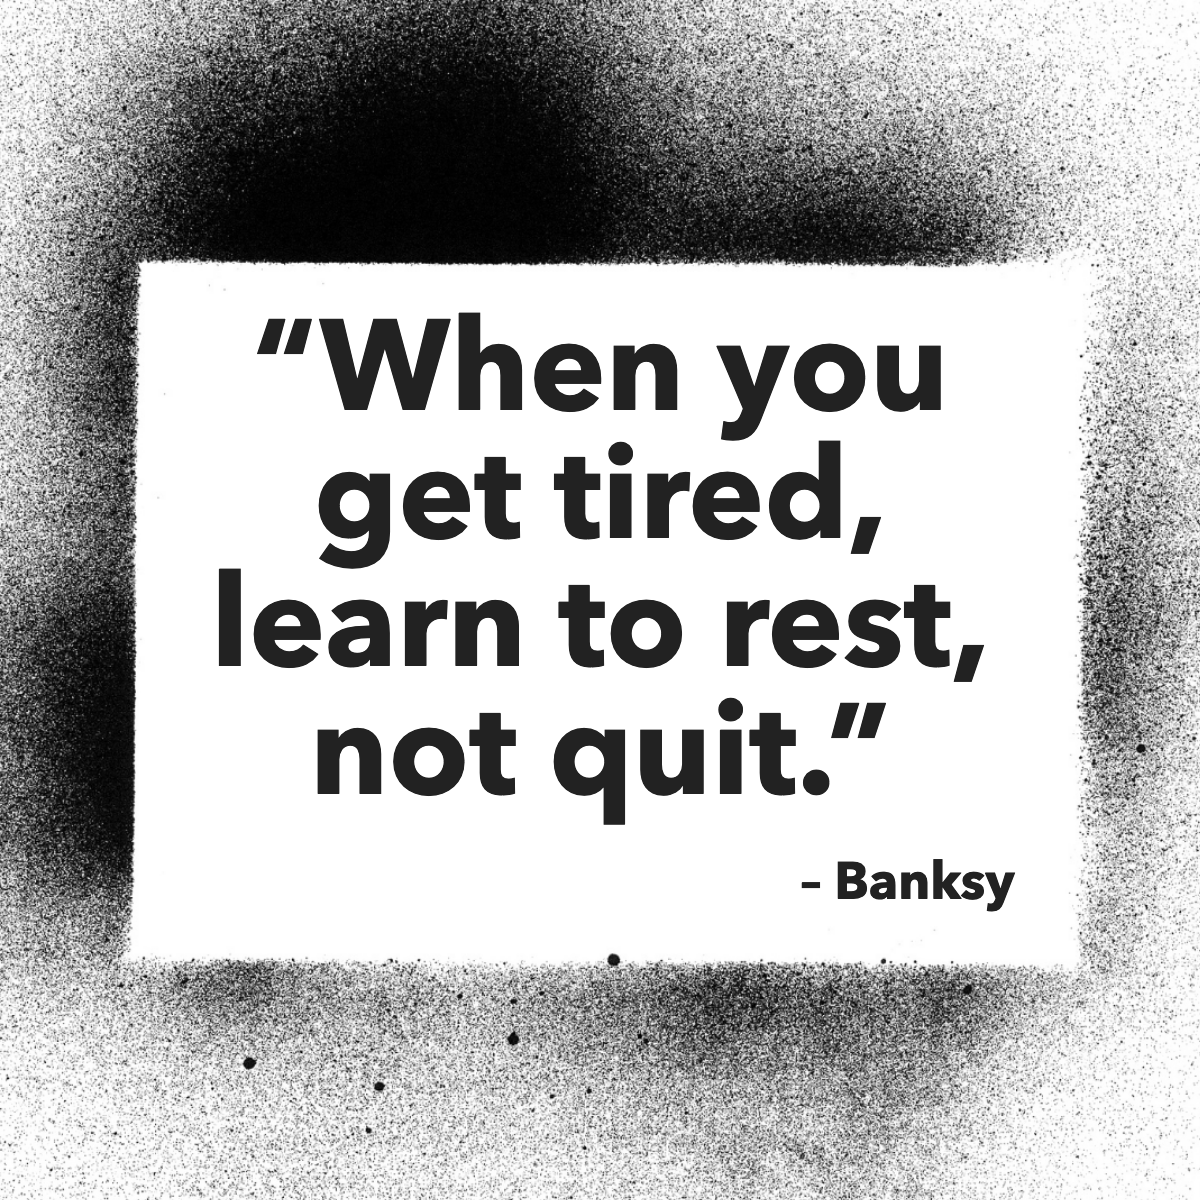 Don't feel guilty if you ever get tired, take your time ... 😉

#motivationnation #motivationalquotesdaily #quoteoftheday #quoteofday #quotedaily

 #homesinsdcounty #sandiego